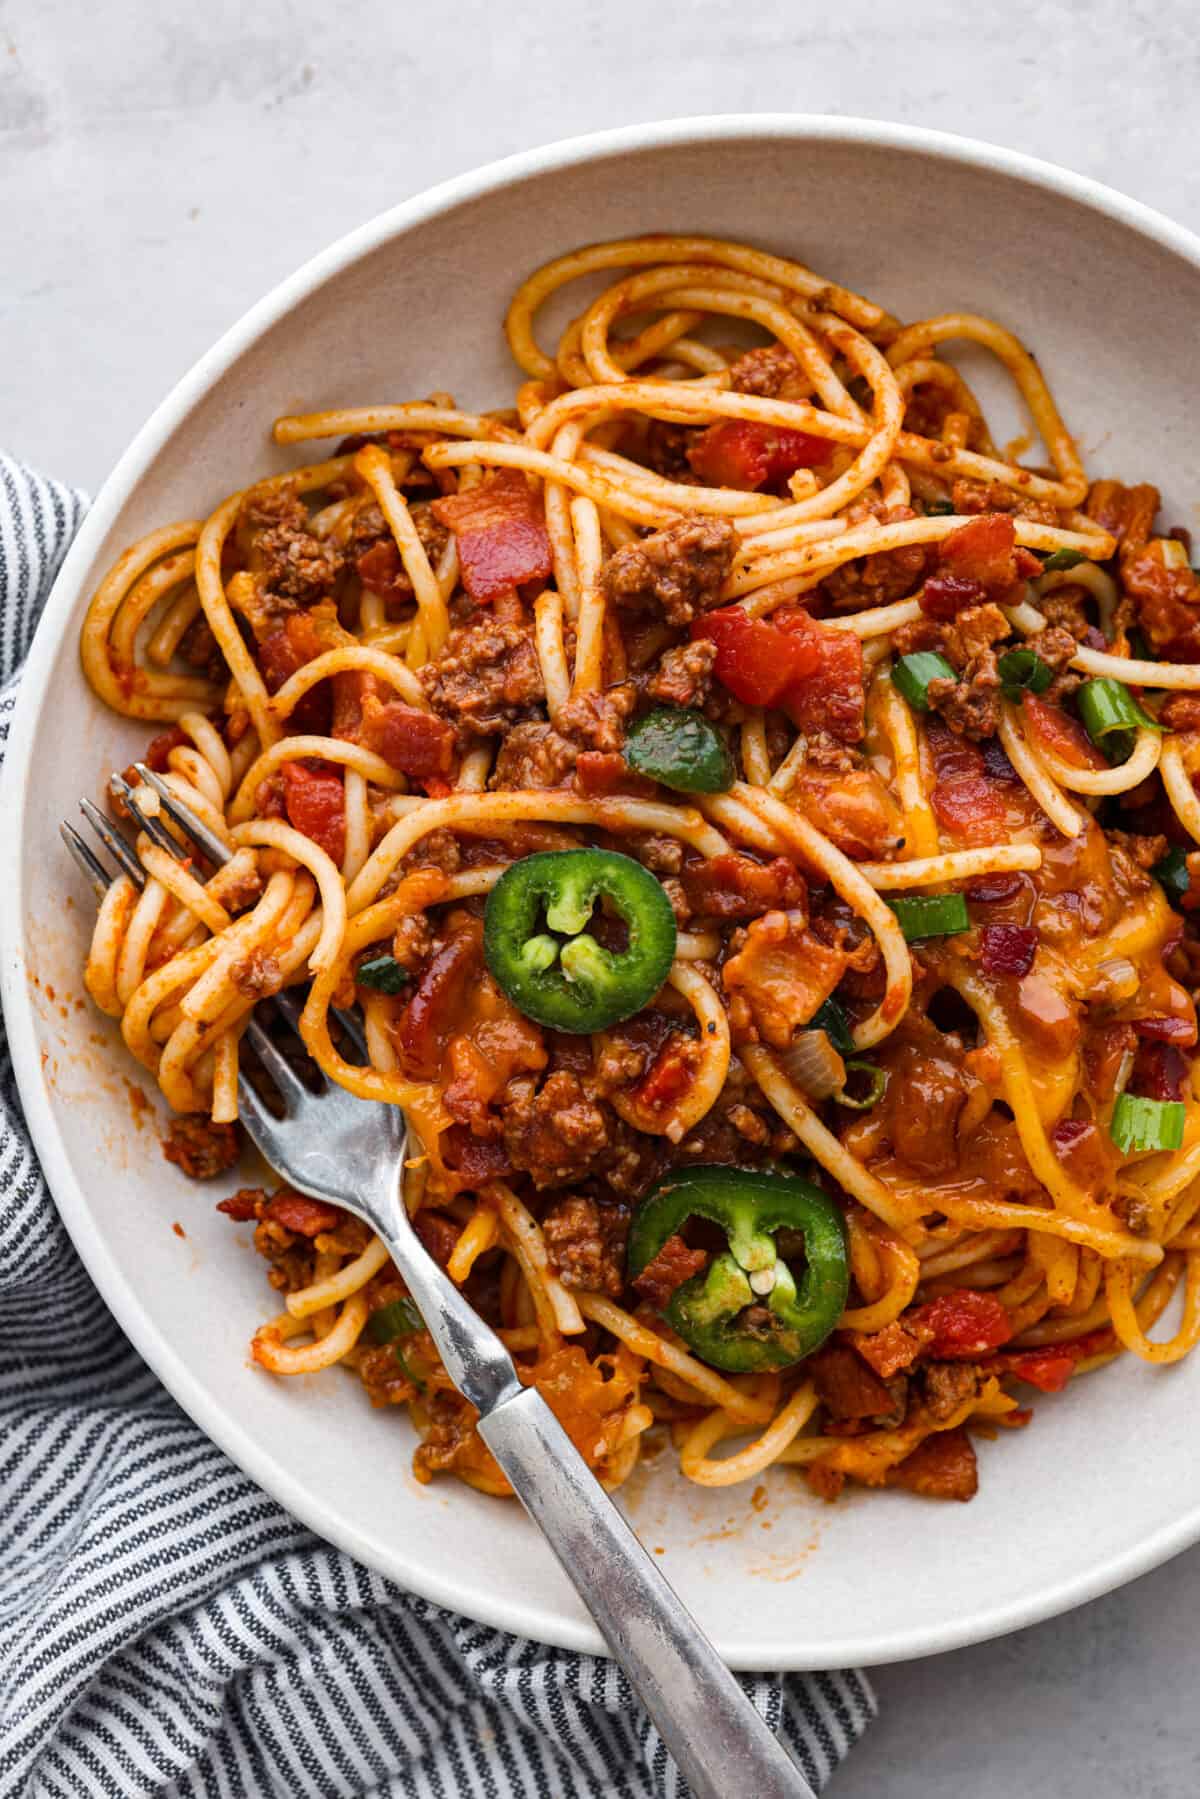 A serving of Cowboy Spaghetti in a white bowl.